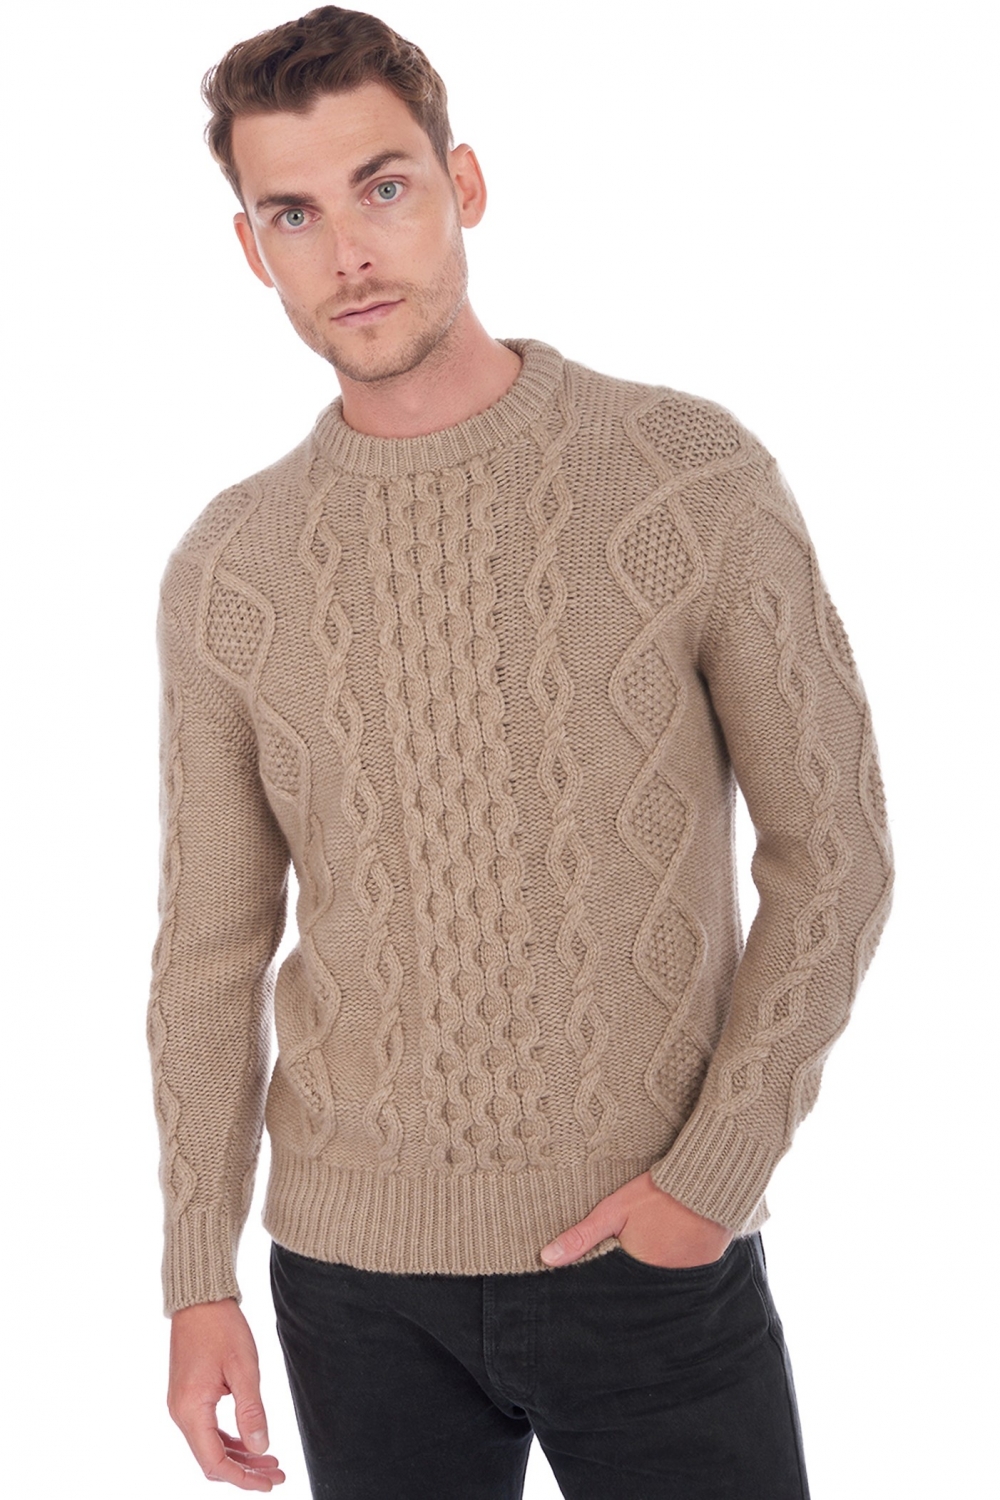 Cachemire pull homme col rond acharnes natural stone 2xl